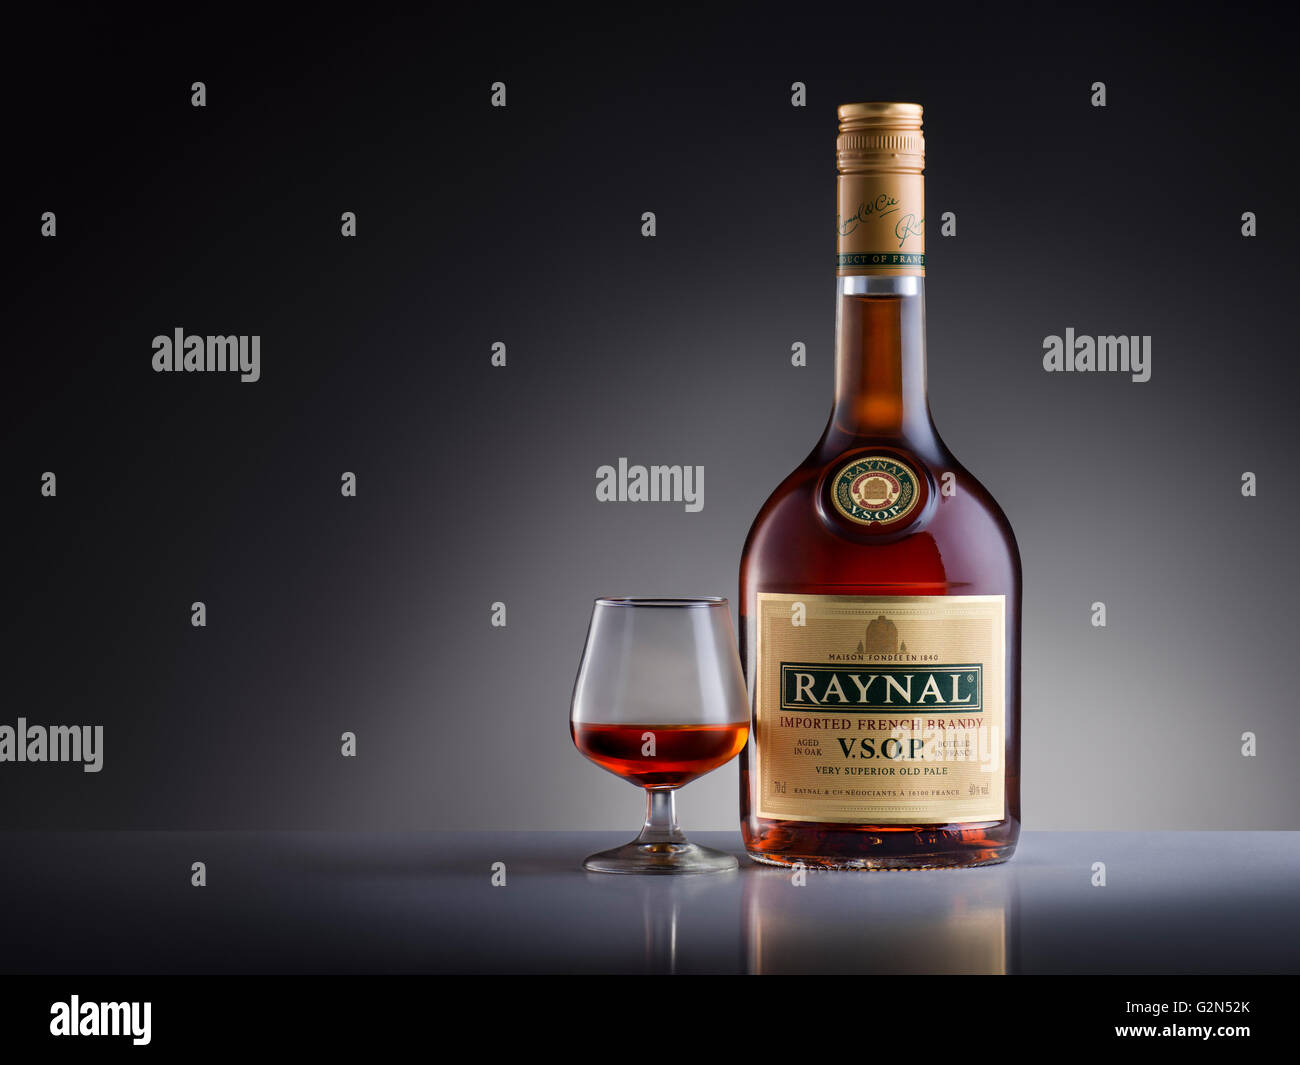 Study pictures of the bottle with a glass of brandy Raynal. Stock Photo